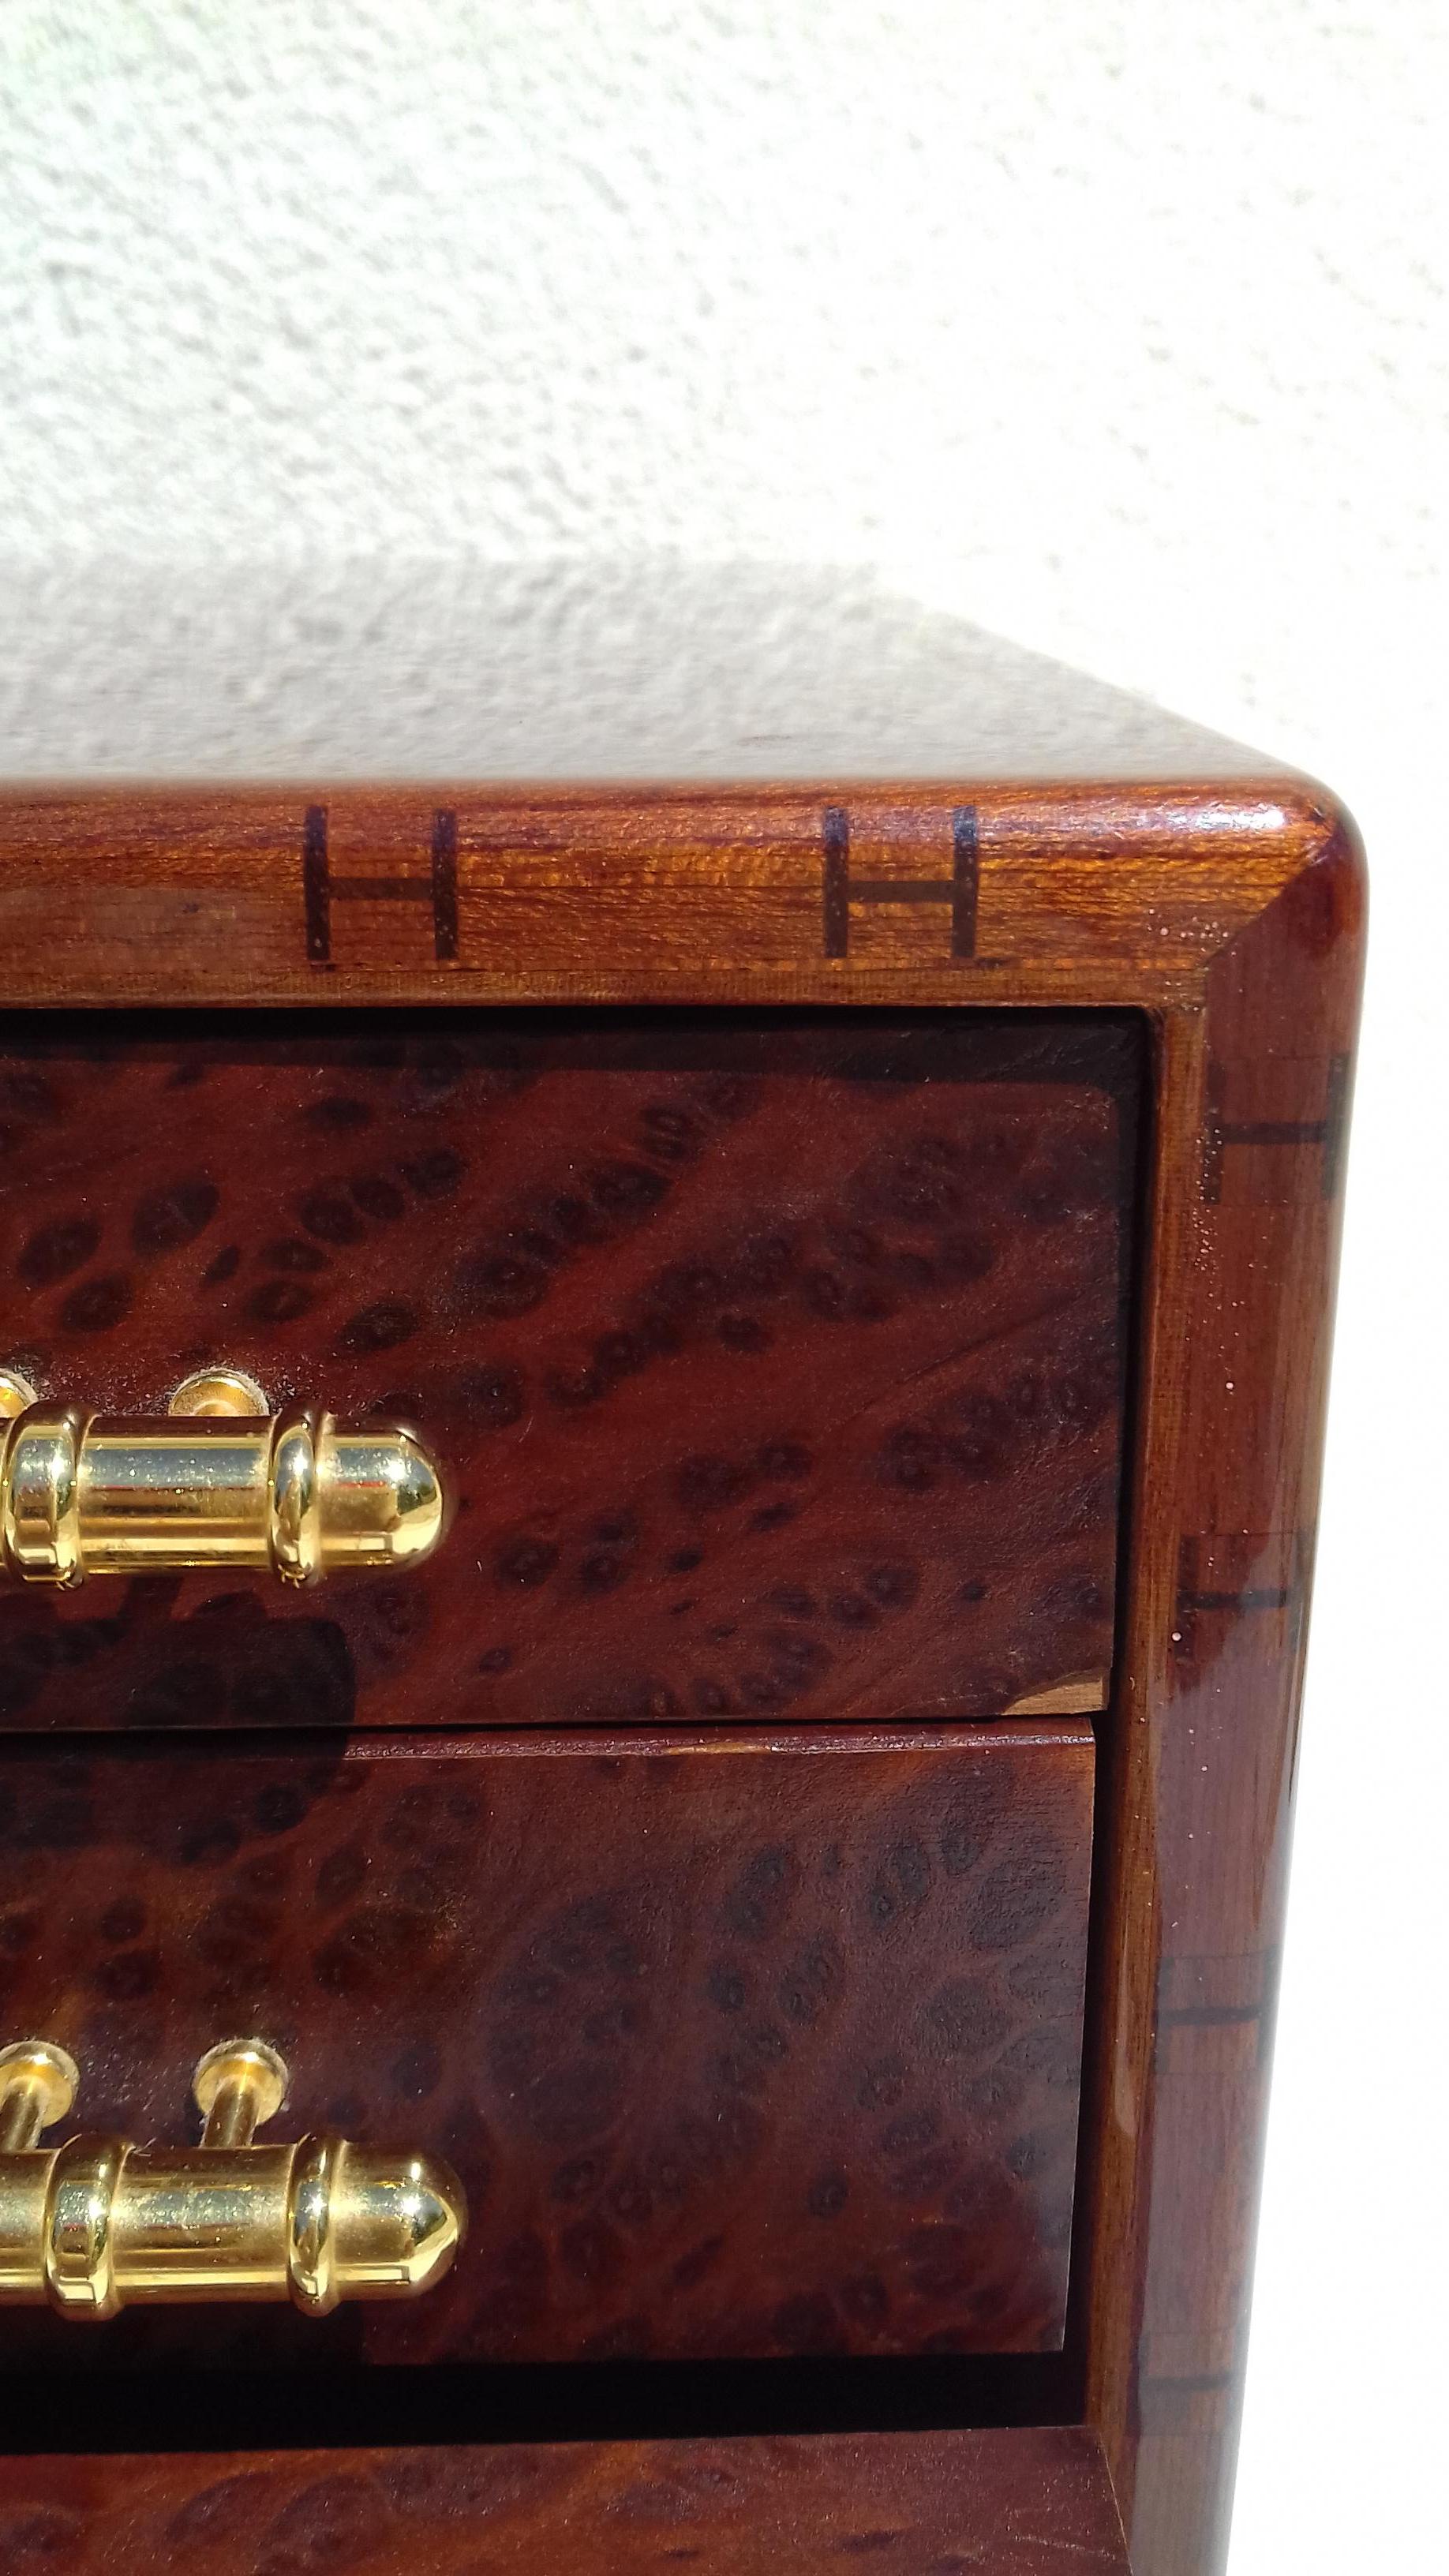 Exceptional Hermès Drawer to store scarves or Jewelry In Wood RARE 4